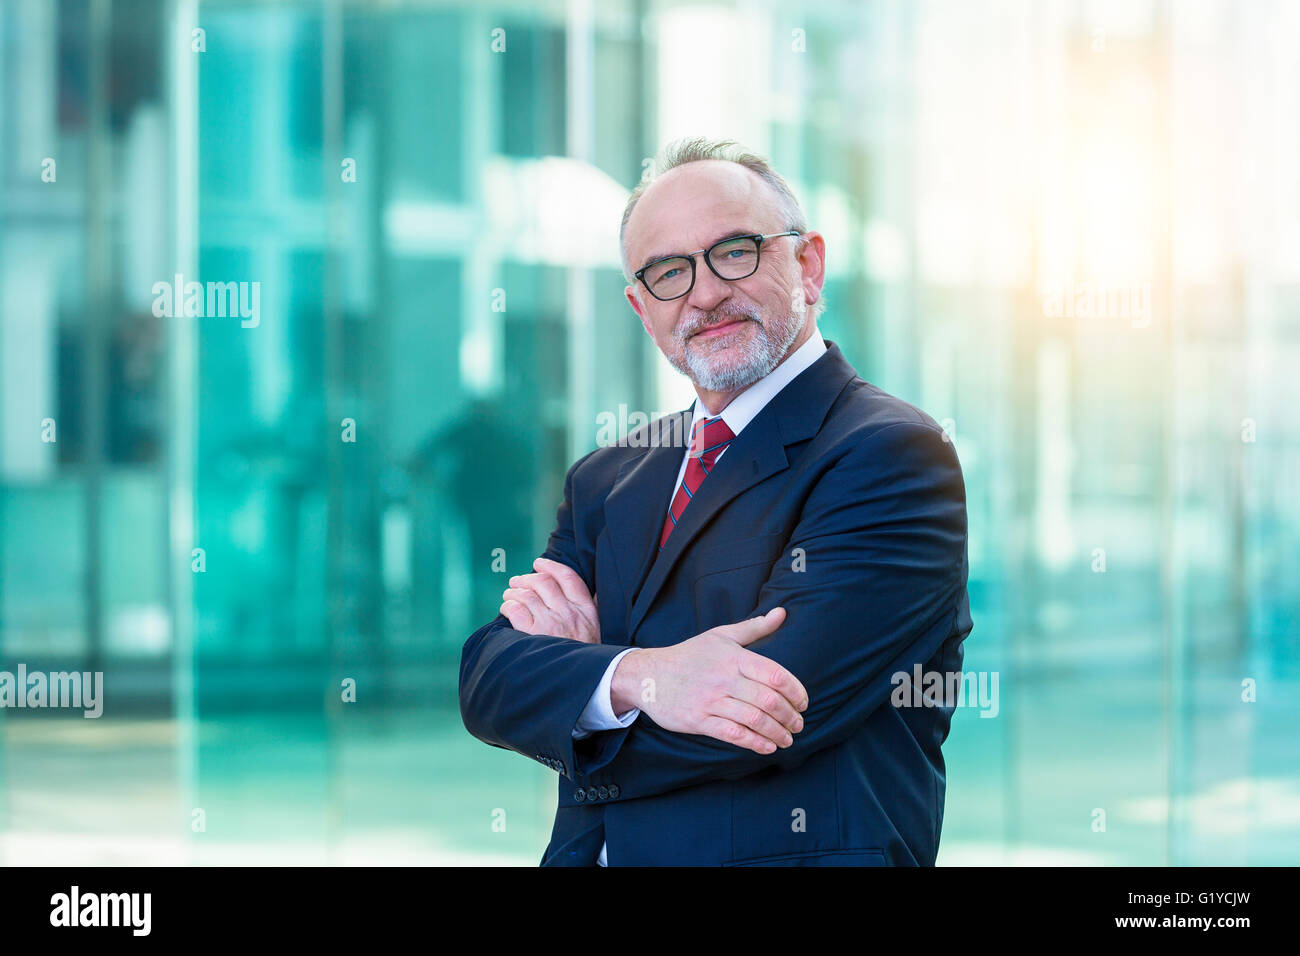 Portrait of a businessman in financial district Stock Photo